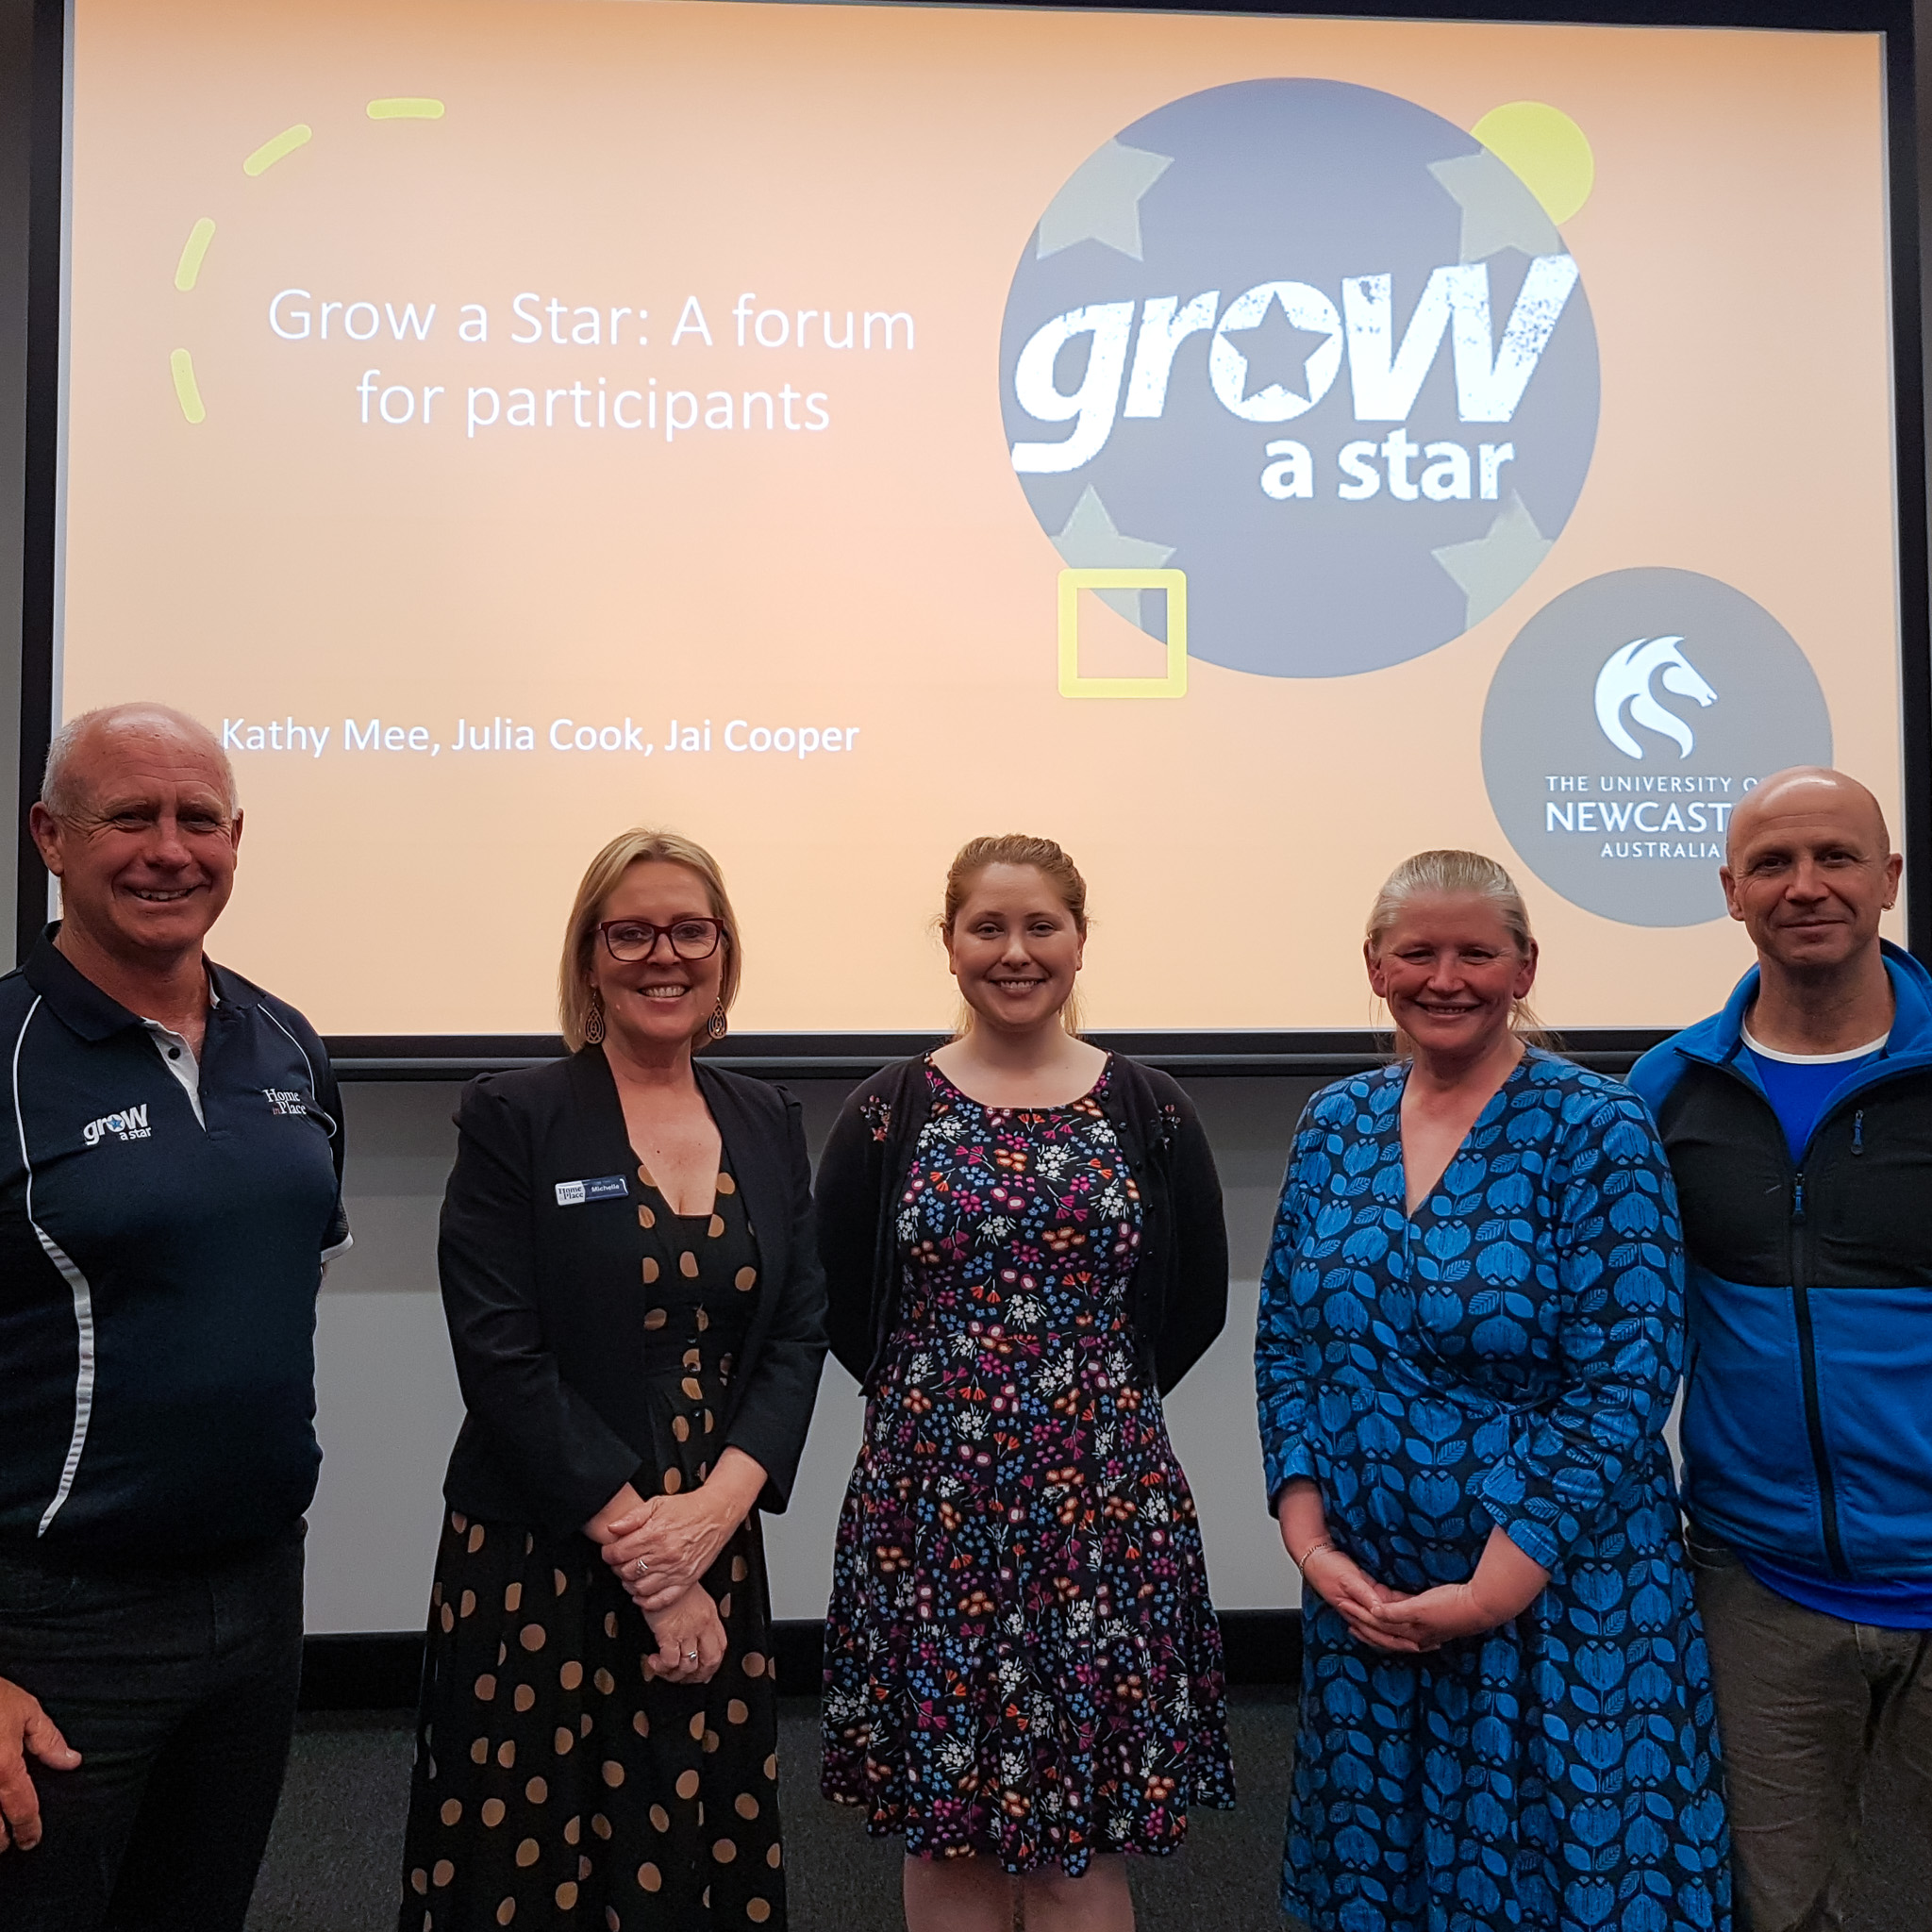 From left to right: Shane Marshall (Grow a Star), Michelle Faithful (Grow a Star), Dr Julia Cook (UON), A. Prof. Kathy Mee (UON) and Dr Jai Cooper (UON)